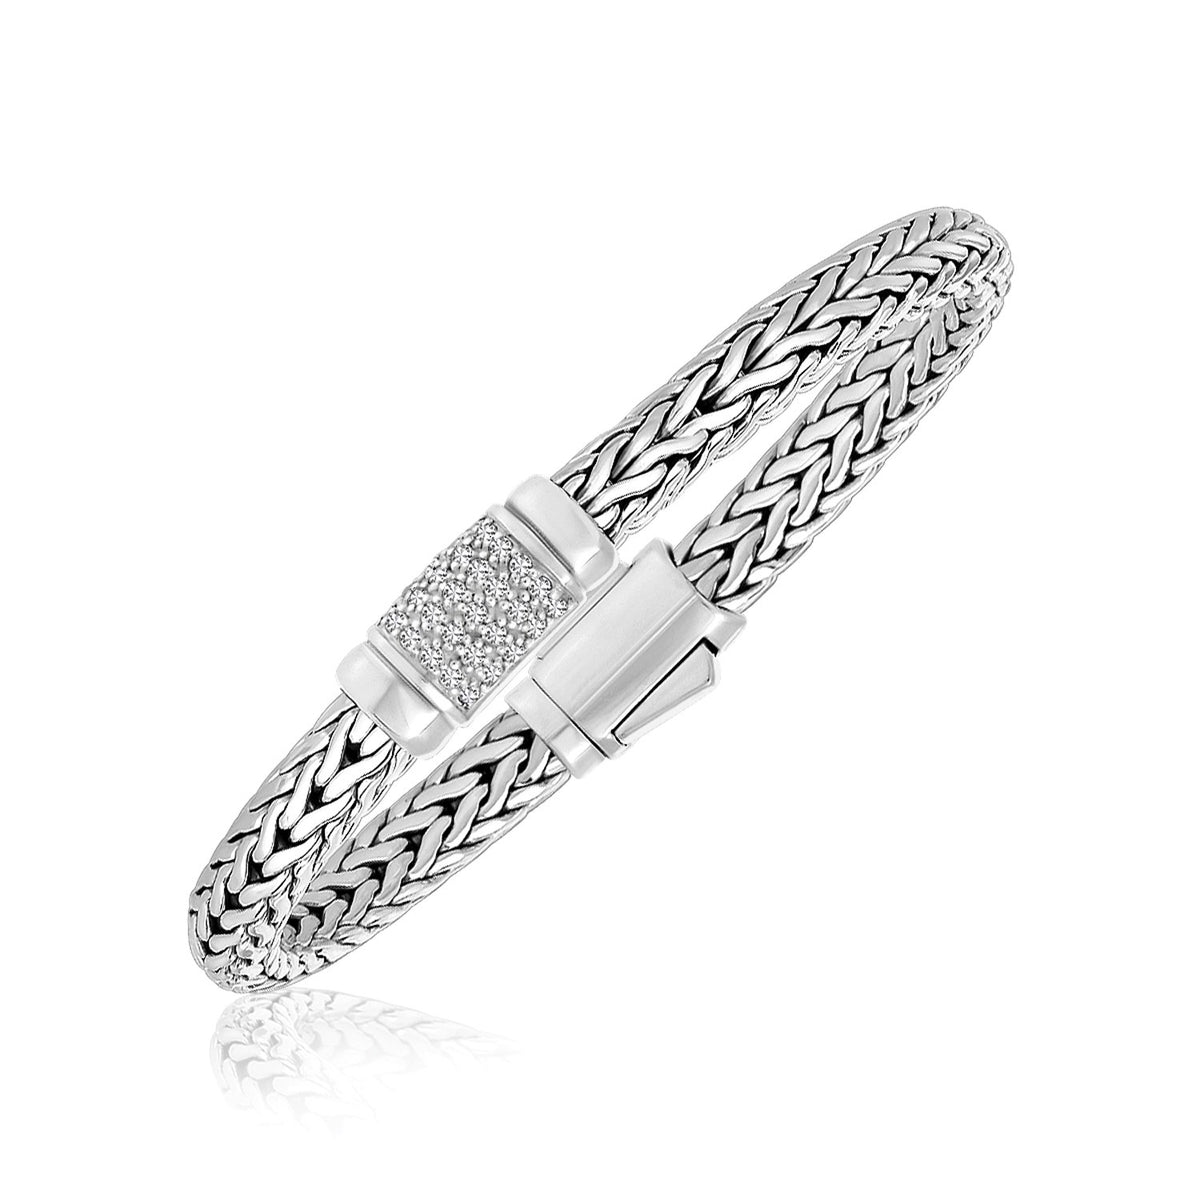 Weave Motif Bracelet with White Sapphire Accents - Sterling Silver 6.35mm